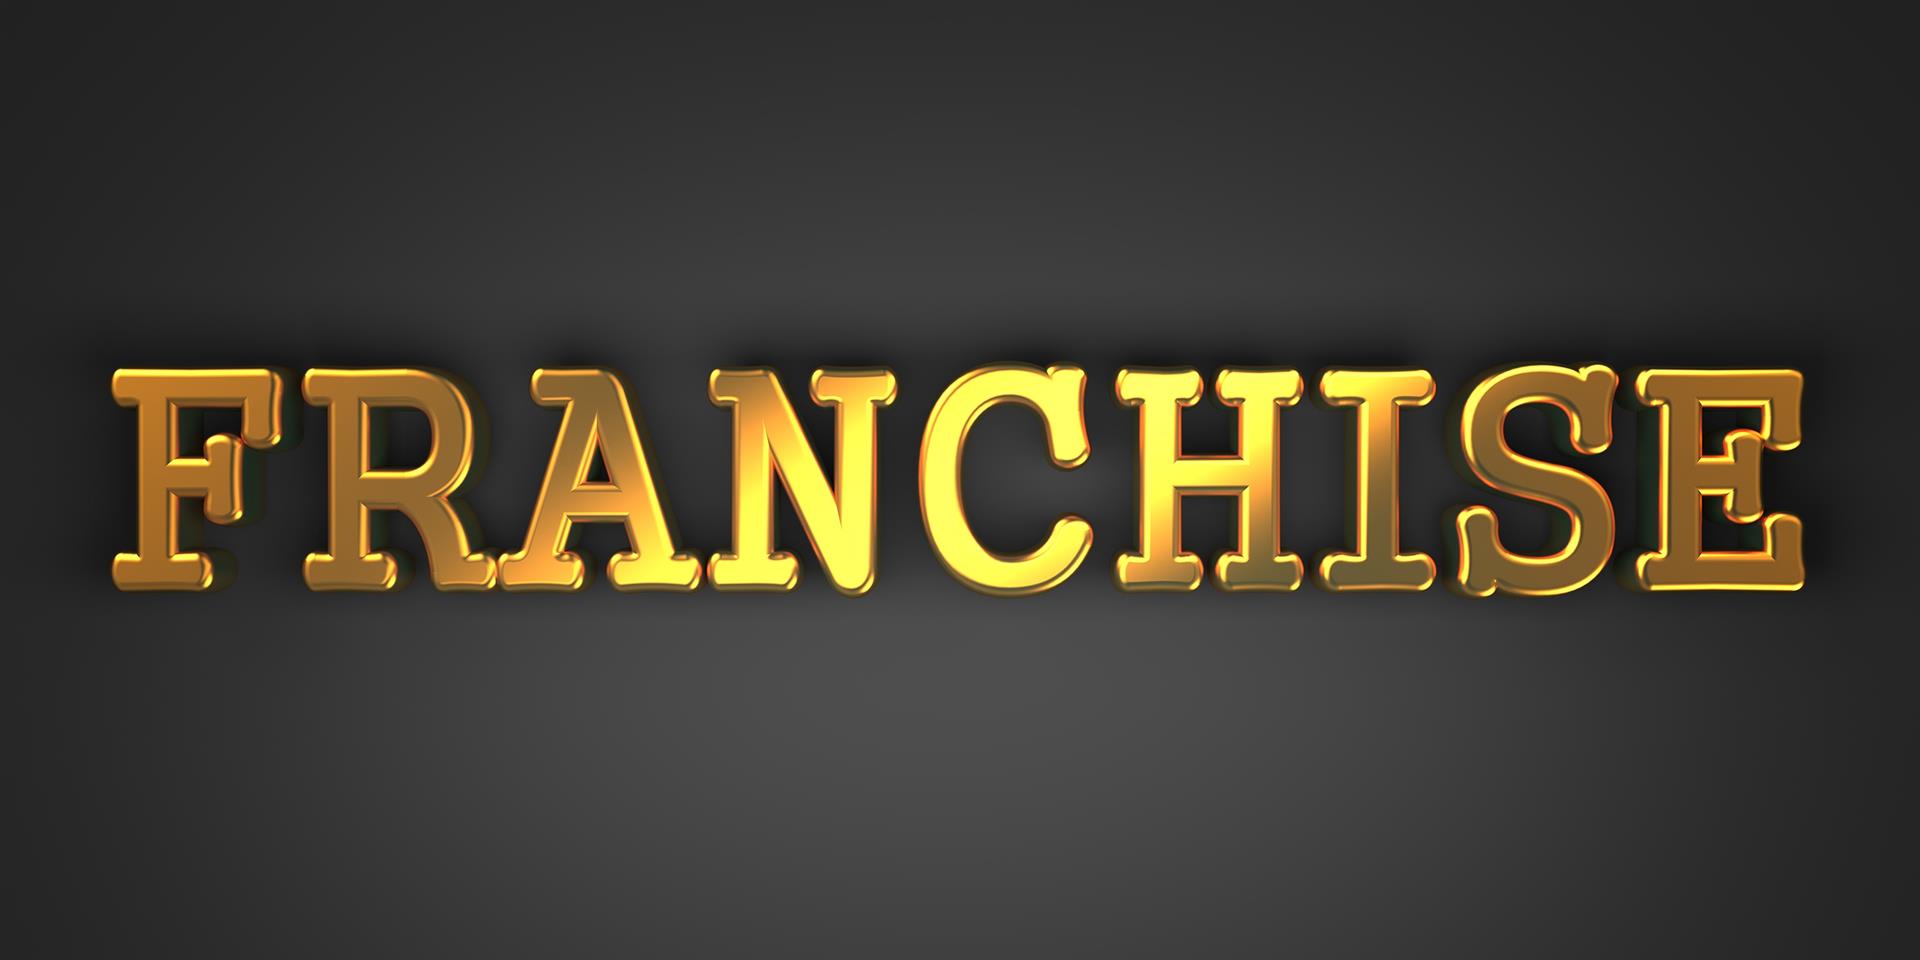 Service Franchise vs. Product Franchise: A Guide to Choosing